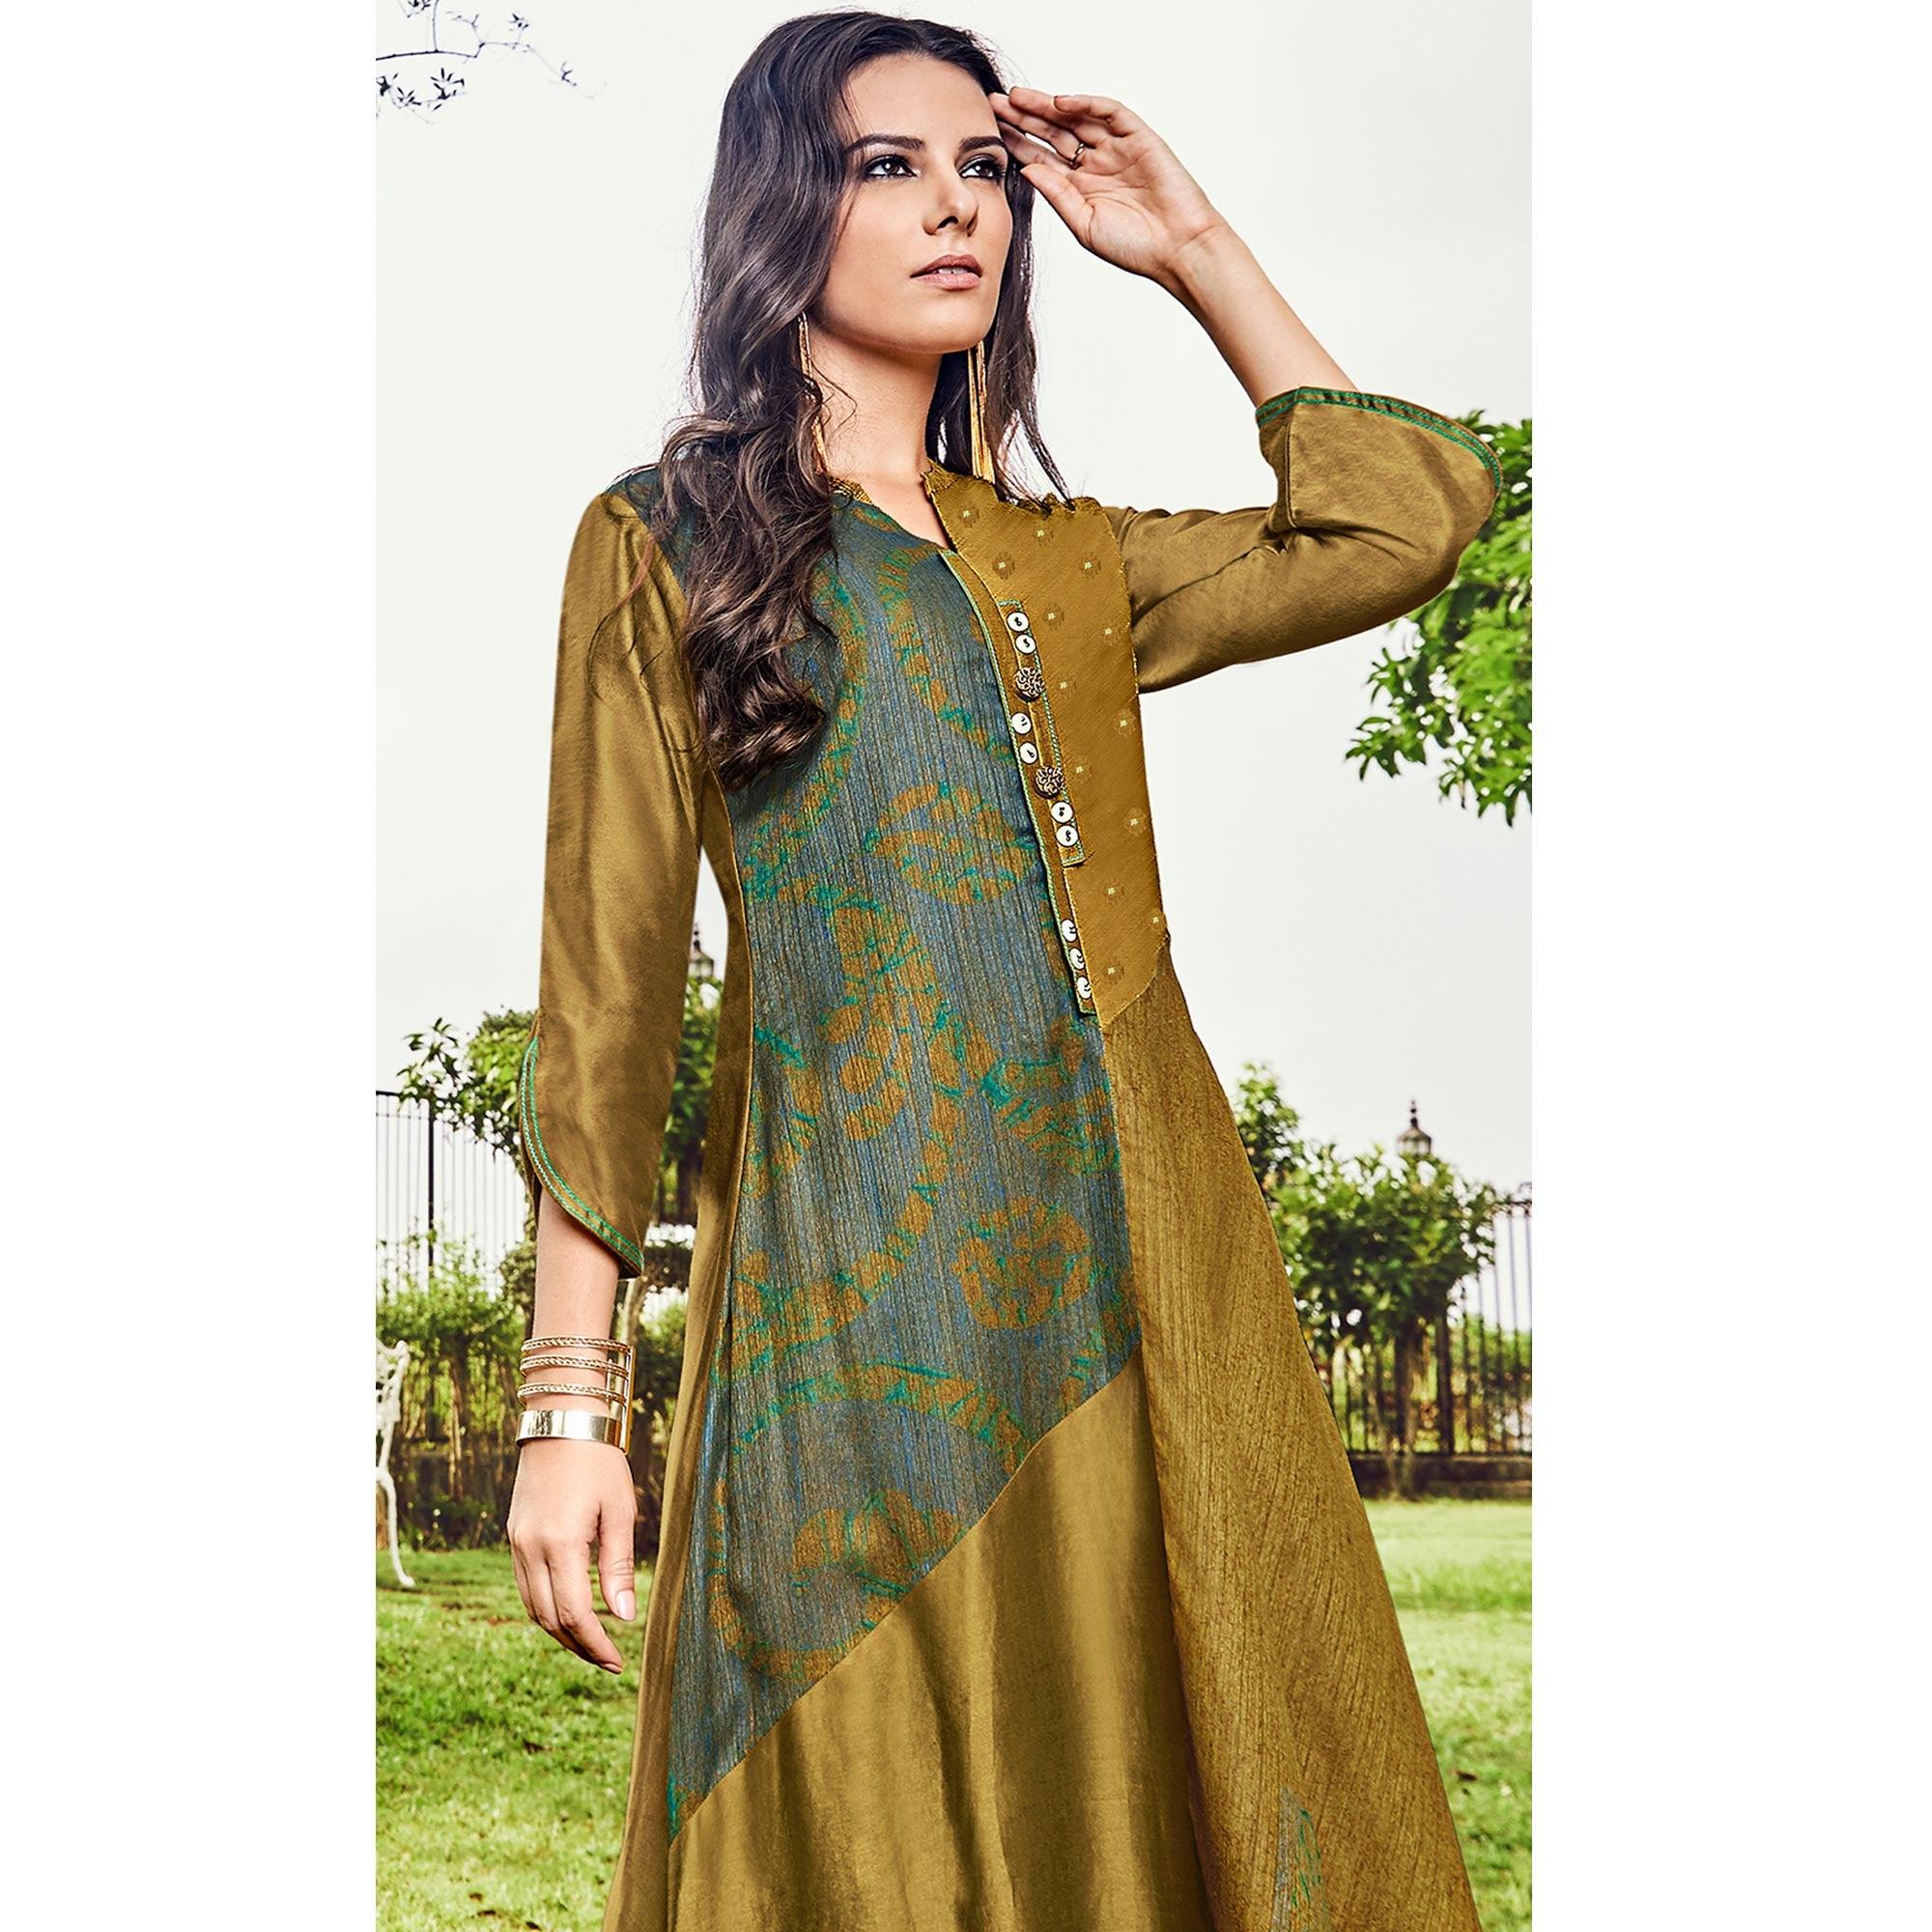 Blooming Olive Green Colored Party Wear Printed Modal-Jacquard Long Kurti - Peachmode